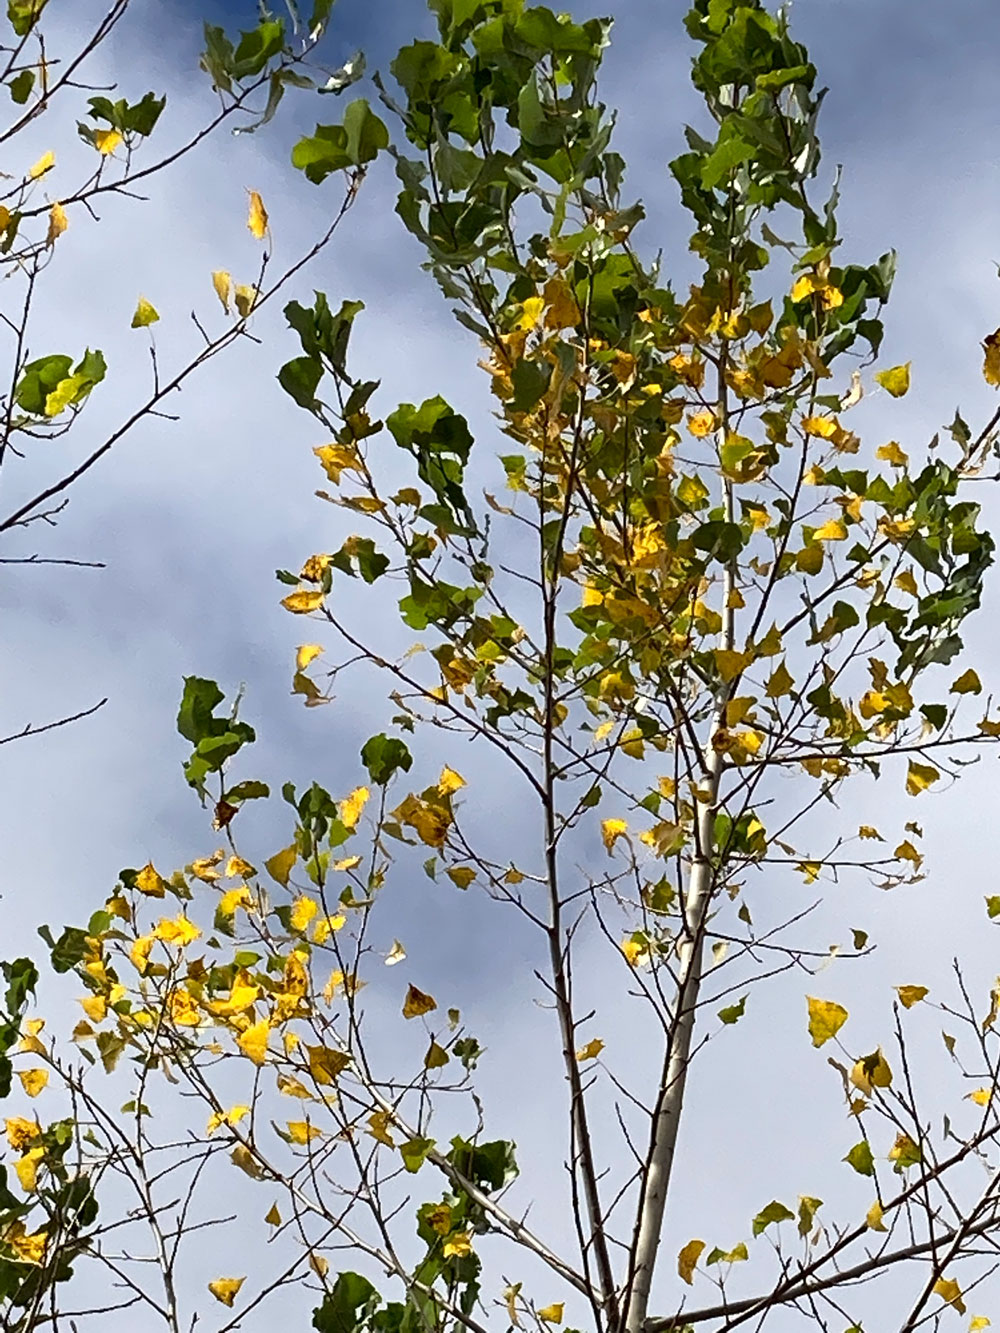 Poplar canopy with yellow and green foliage.